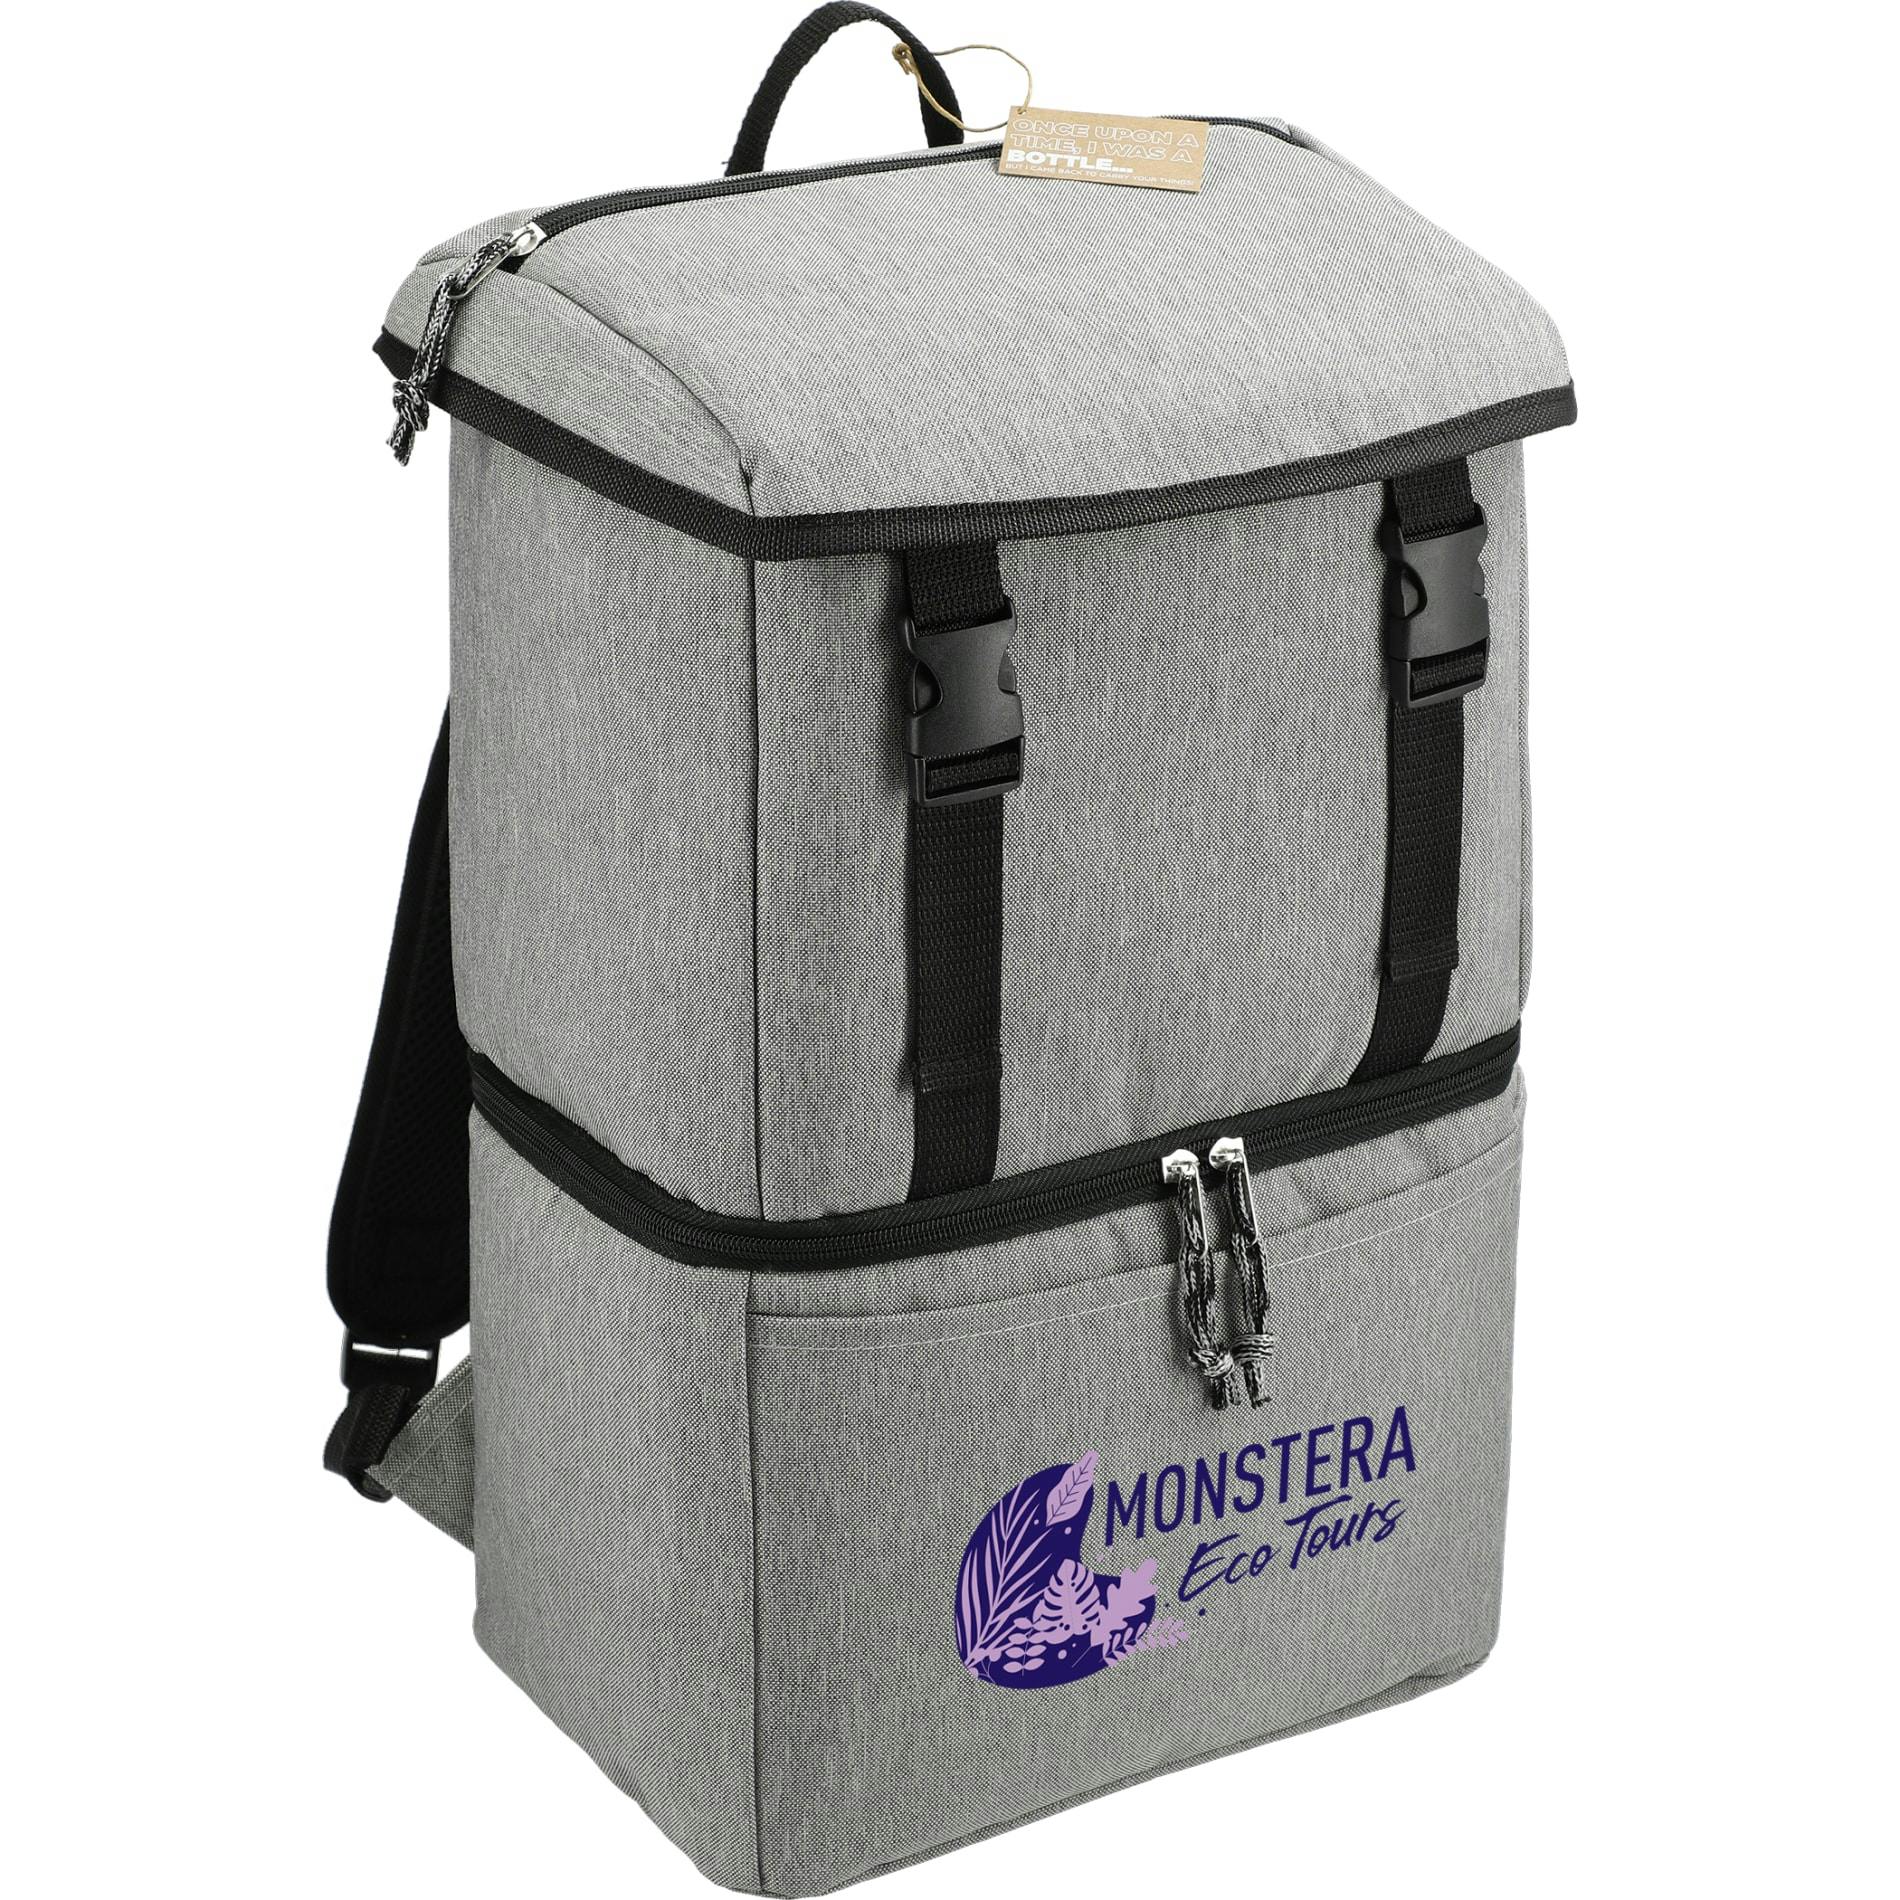 Merchant & Craft Revive Recycled Backpack Cooler - additional Image 5